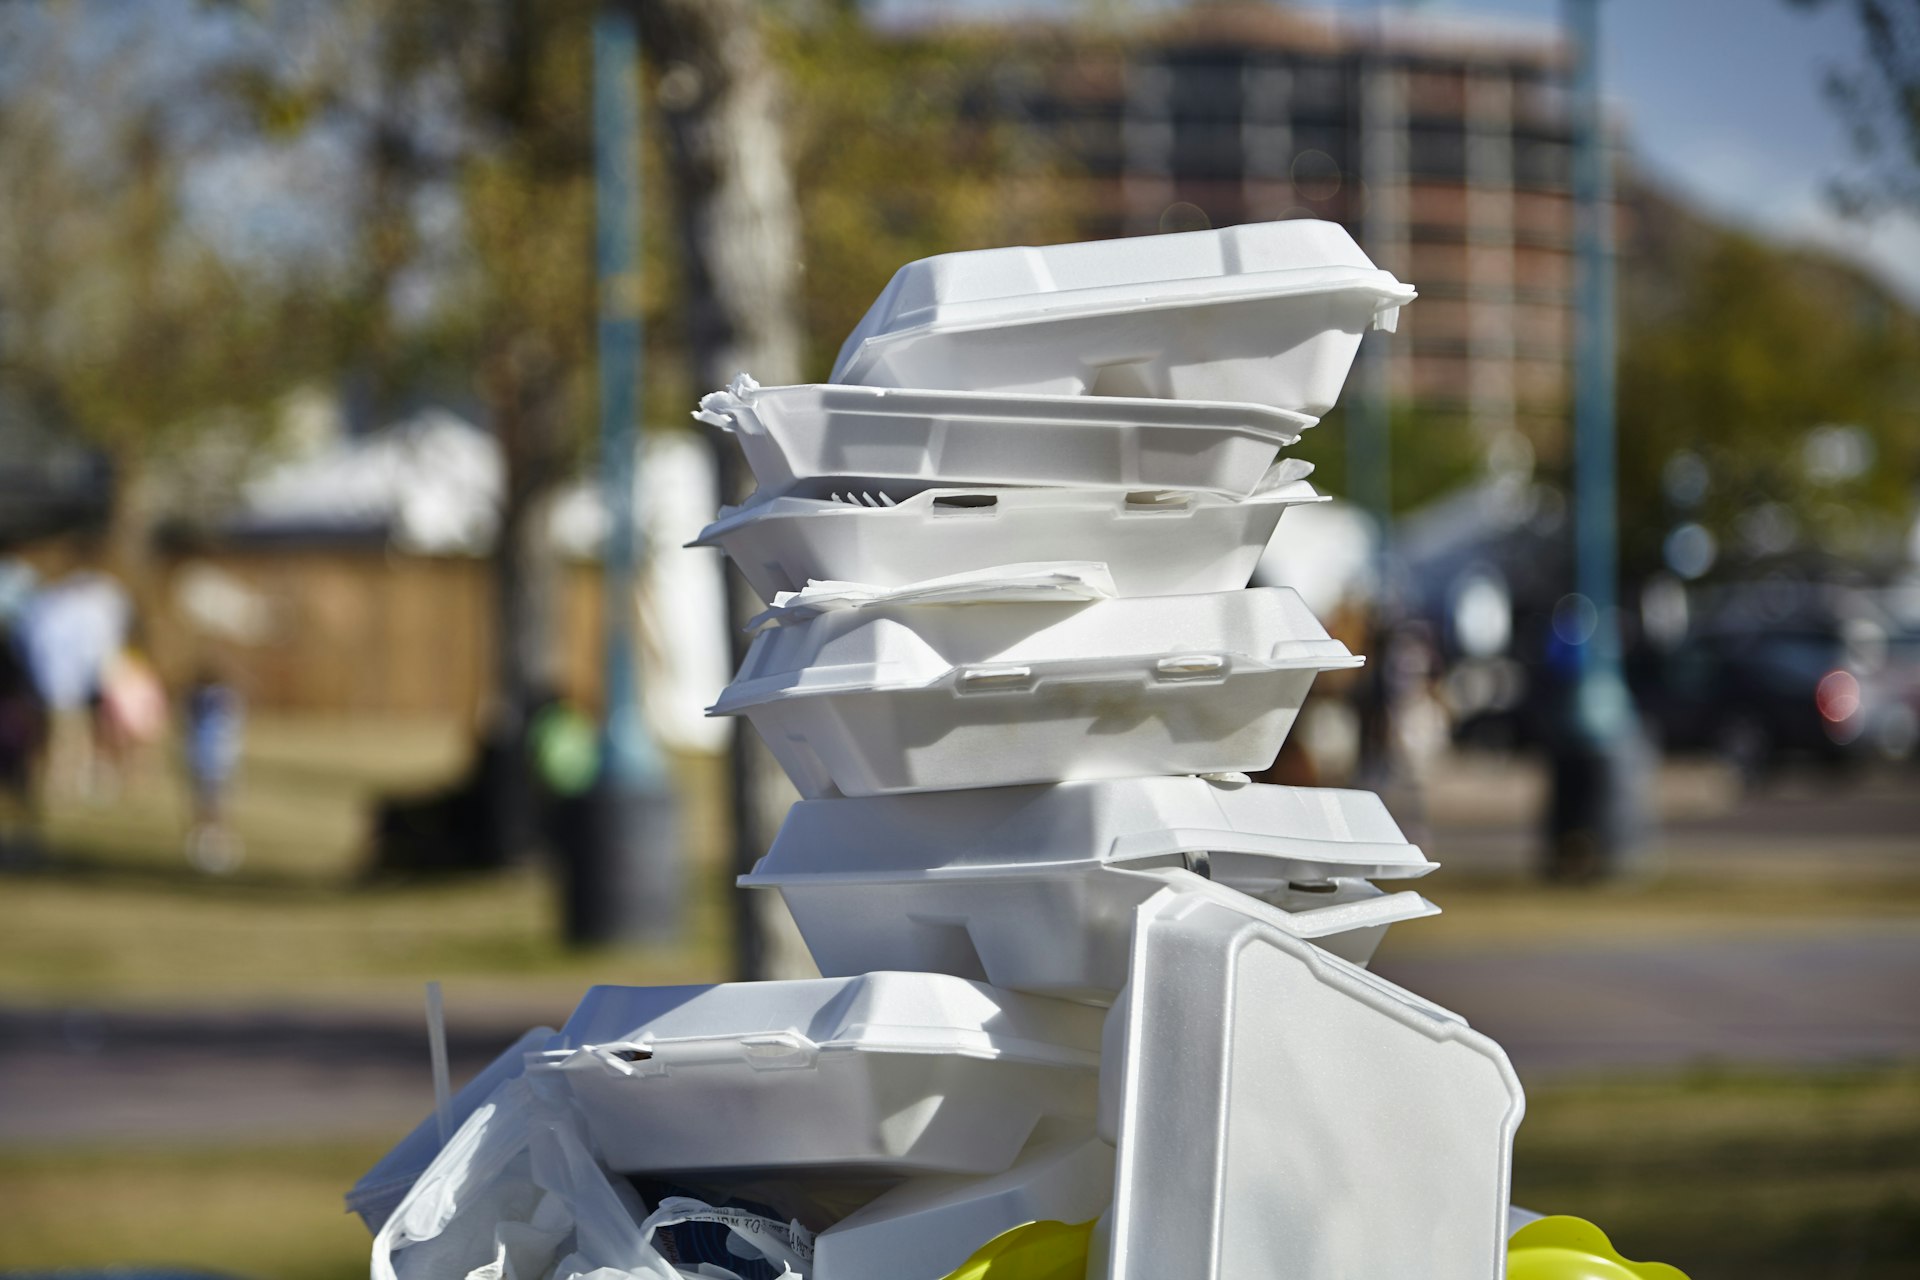 Used white fast-food containers piled on top of a trash can